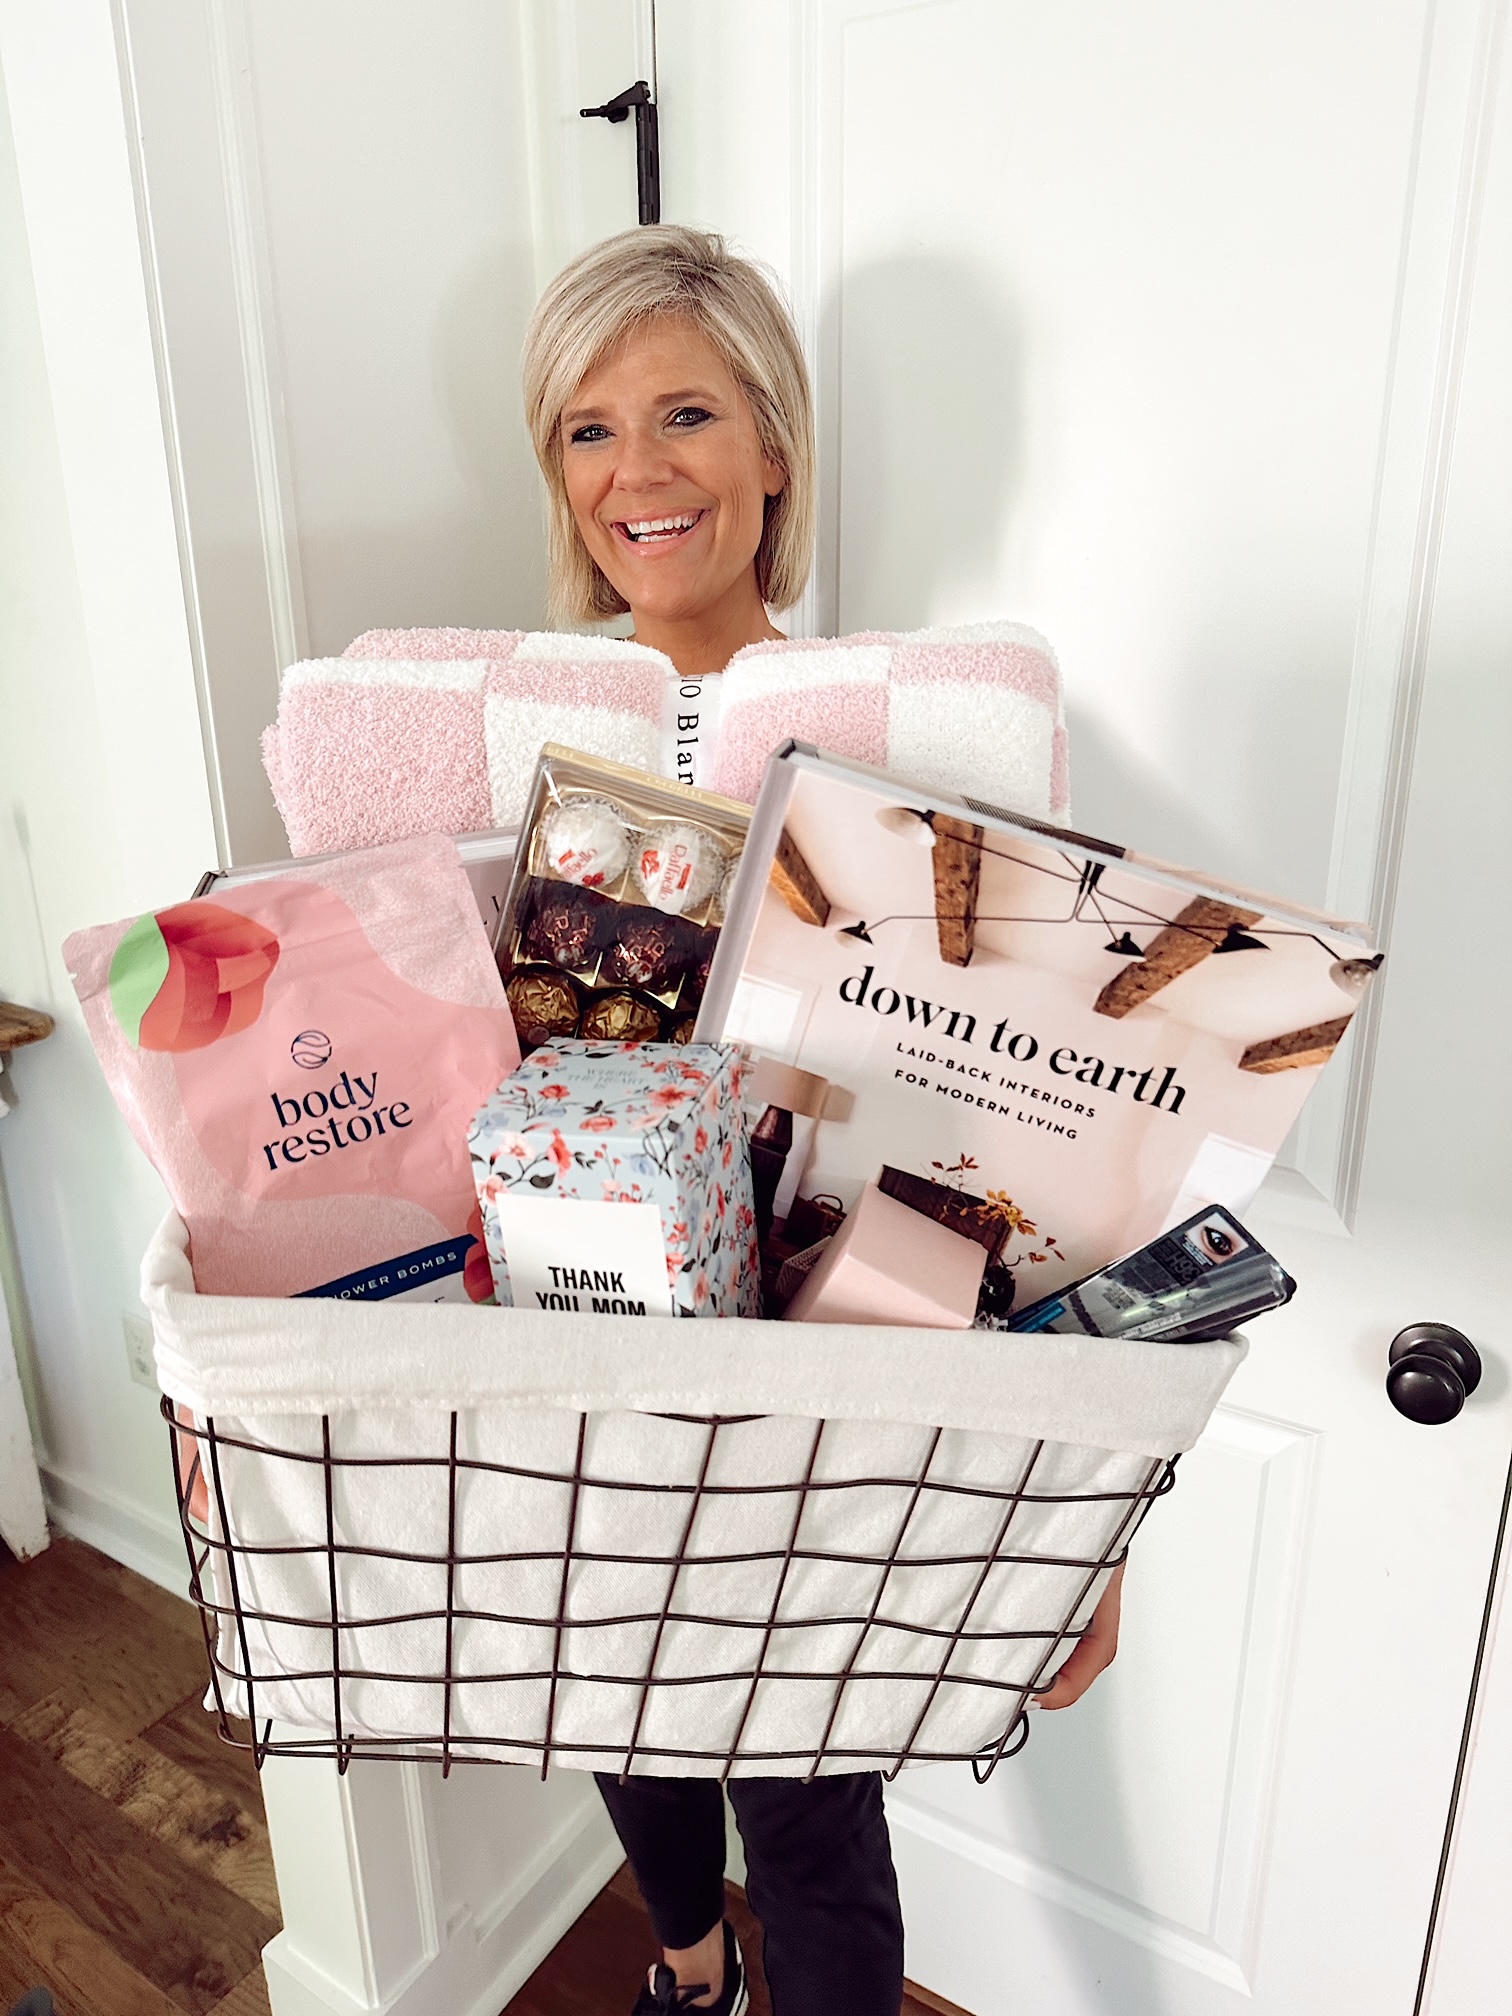 top AL home blogger, She Gave It A Go, showing a Mother's Day amazon gift basket idea